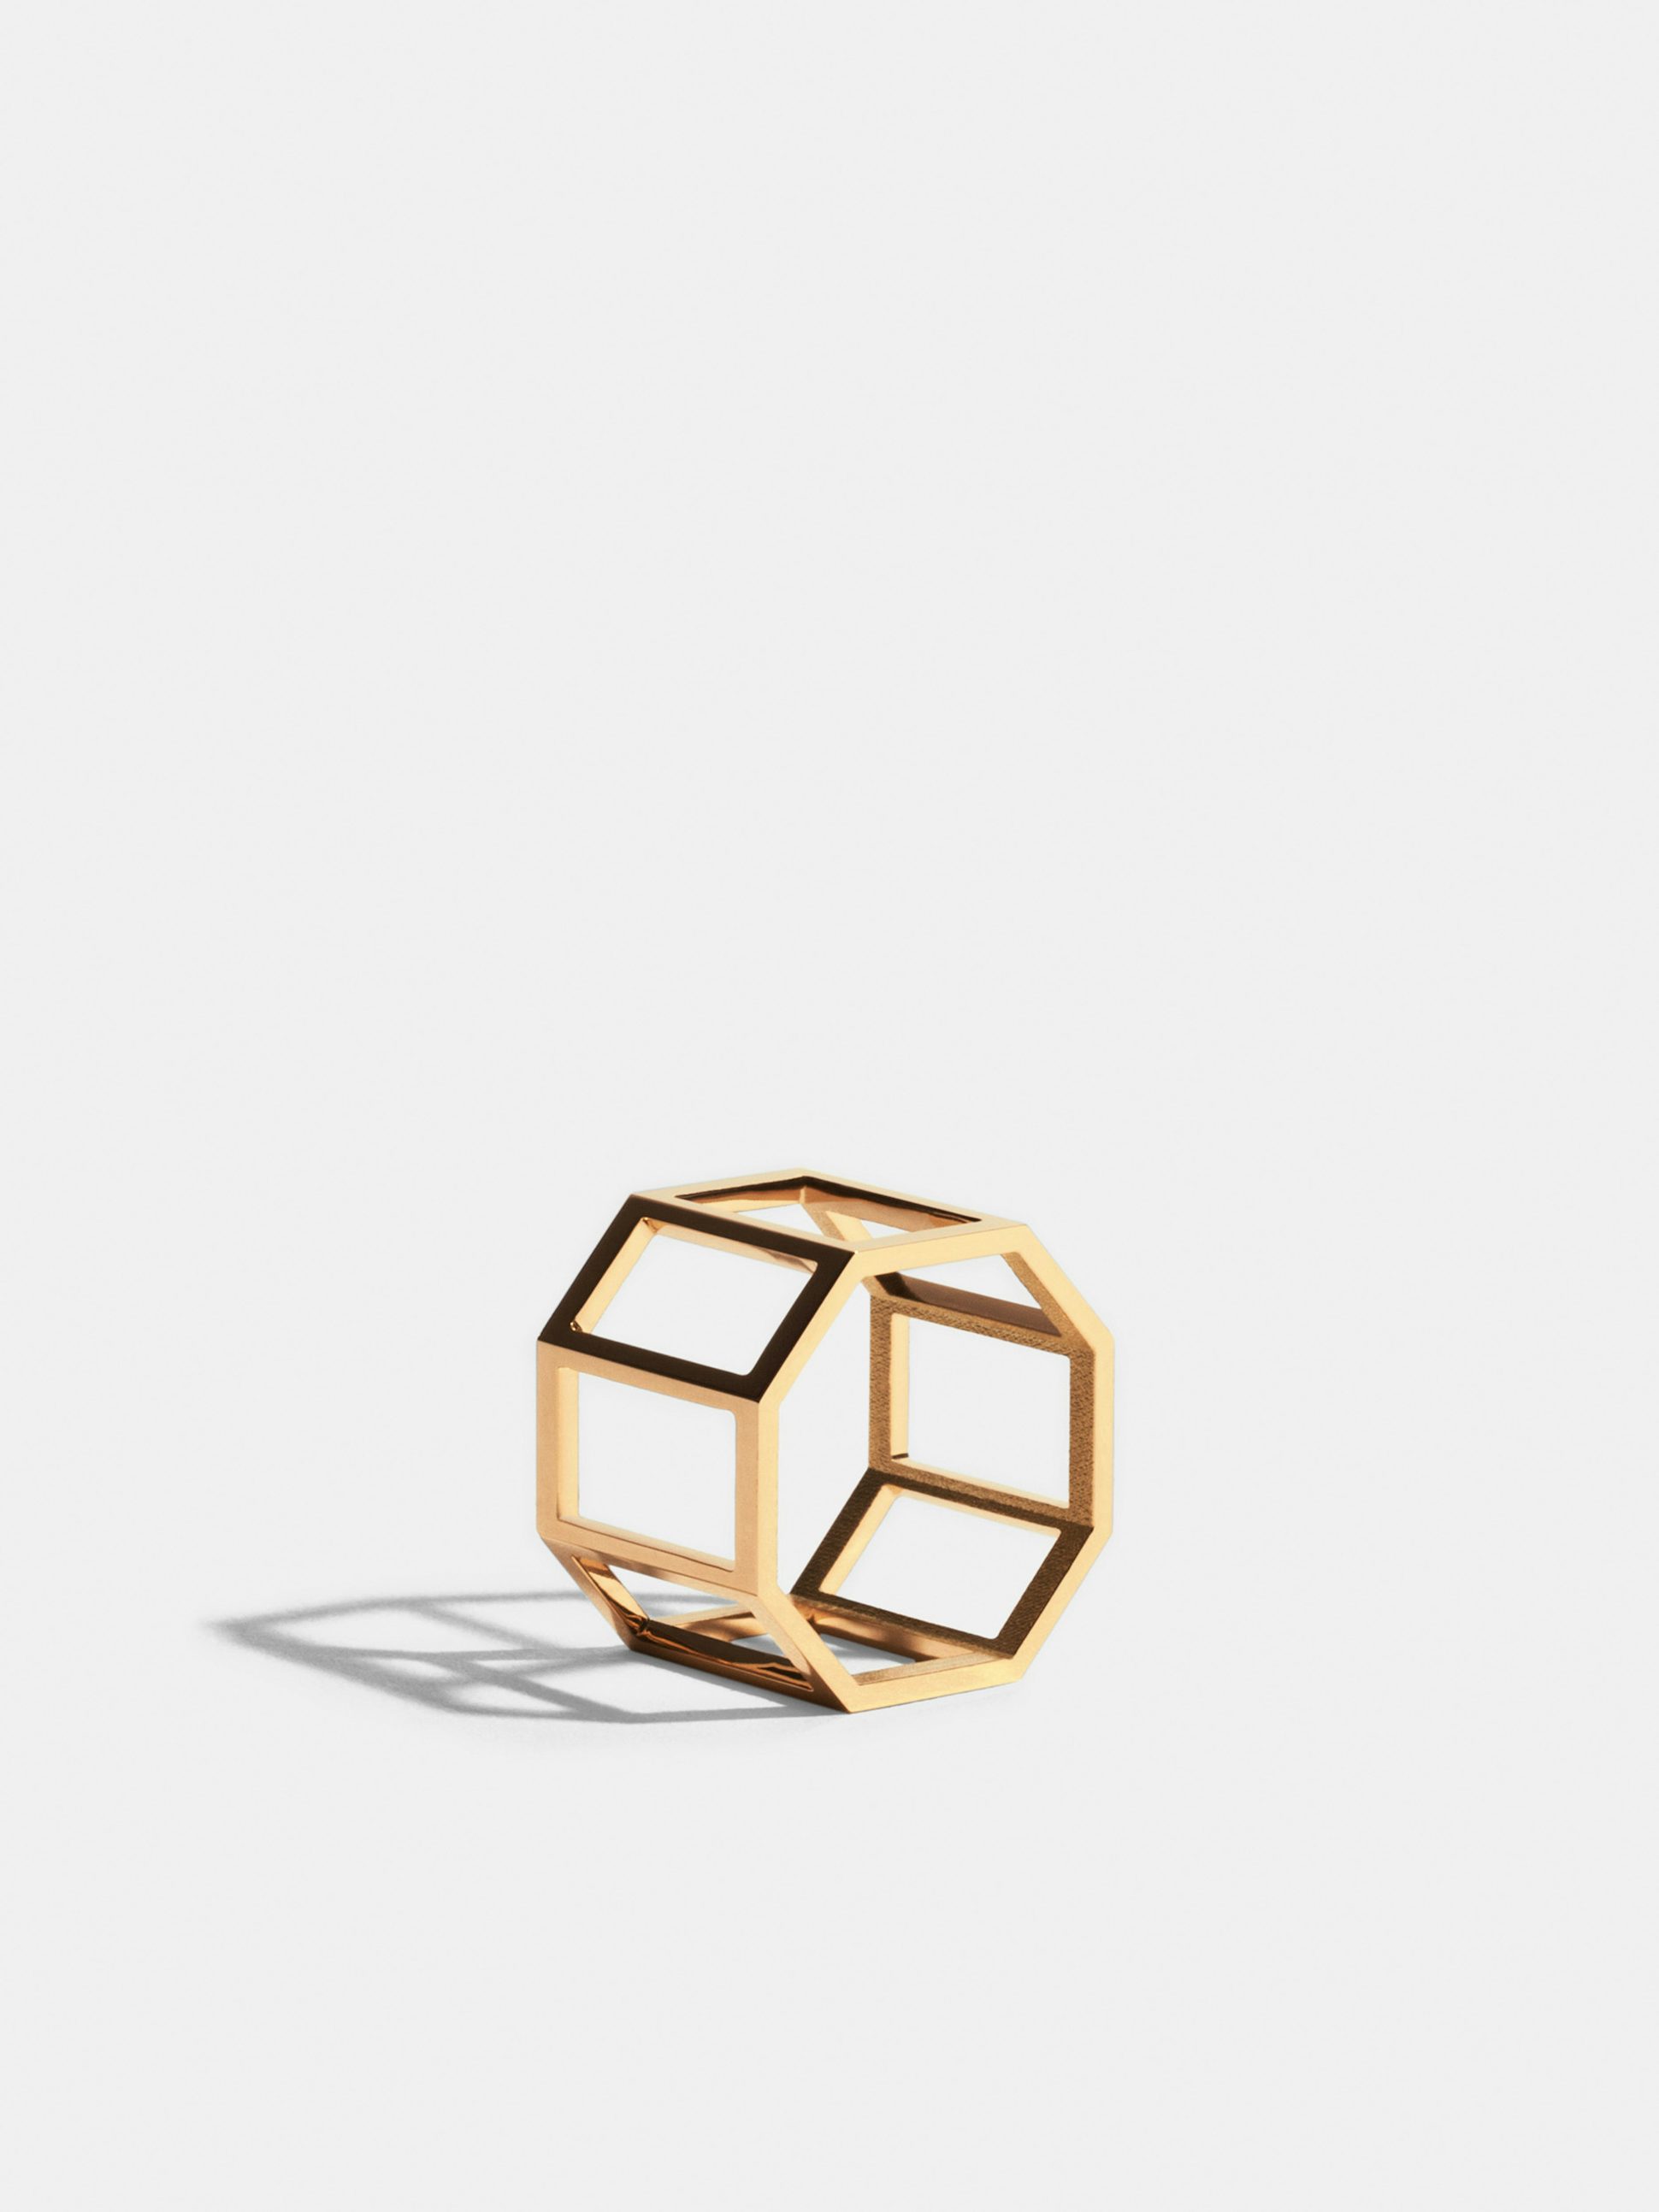 Octogone structured ring in 18k Fairmined ethical yellow gold (14mm)